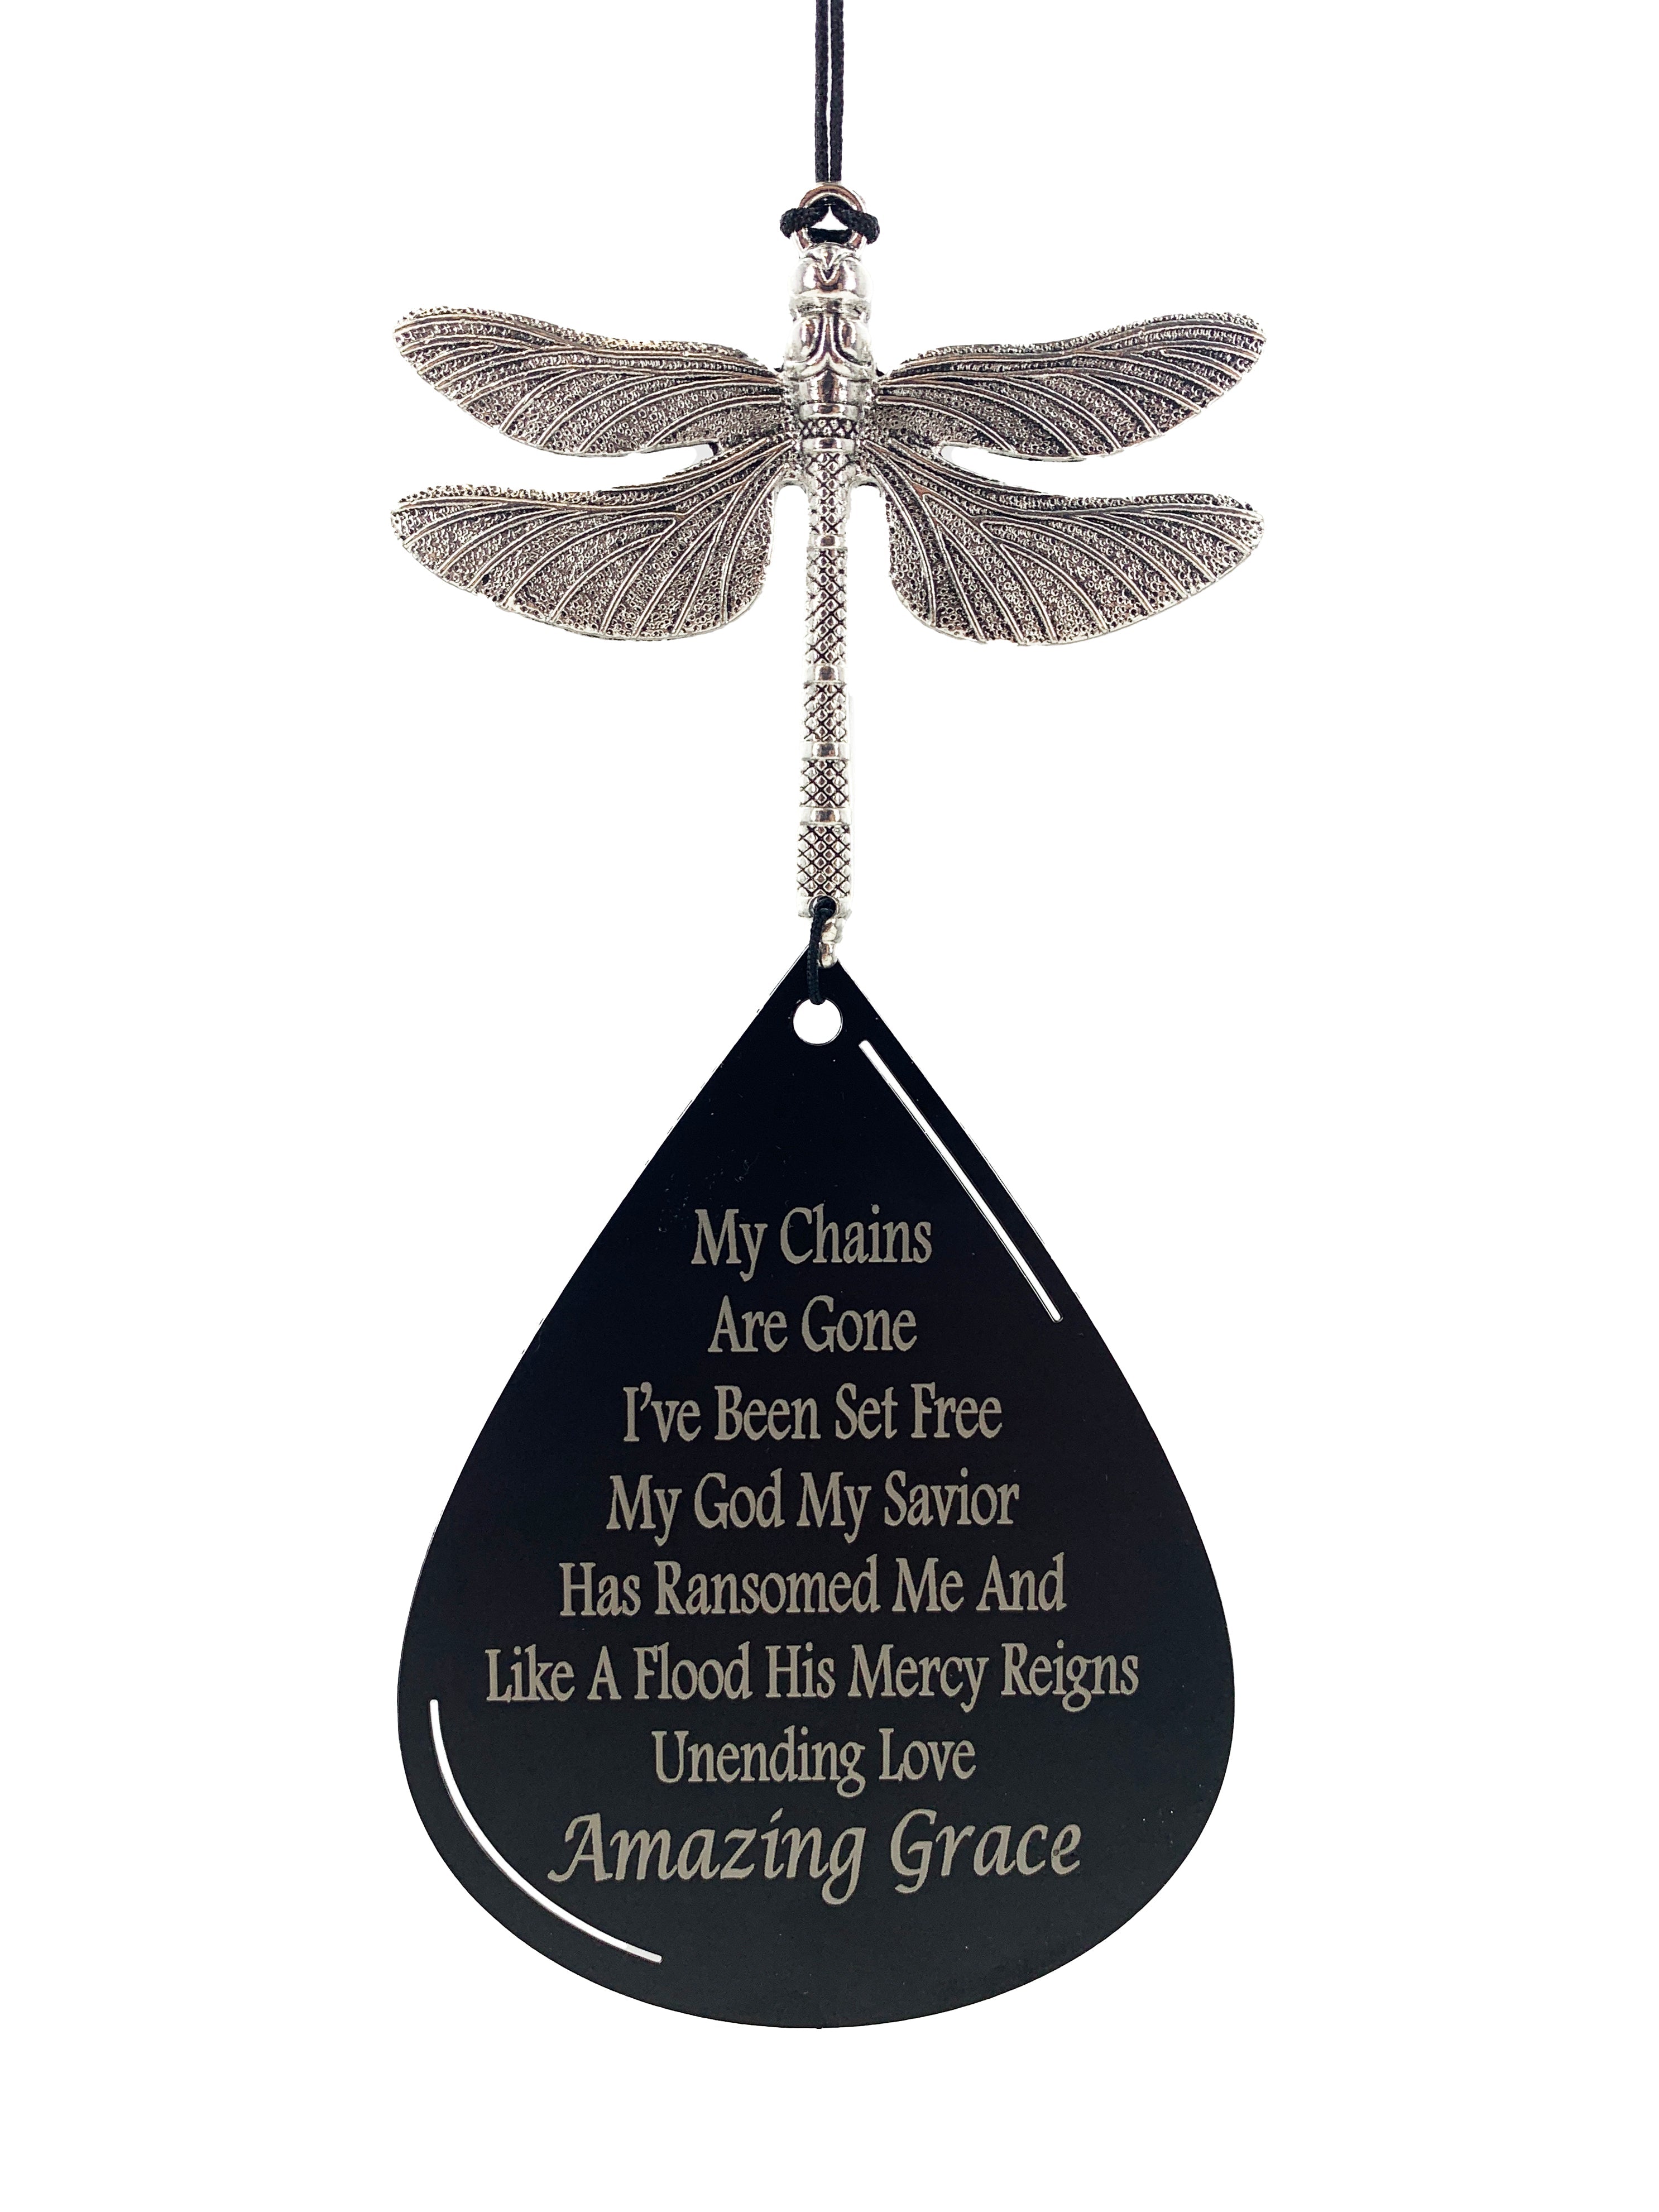 Wind Chime Gifts After Loss of Loved One Dragonfly "Amazing Grace" Memorial Silver Wind Chime by Weathered Raindrop